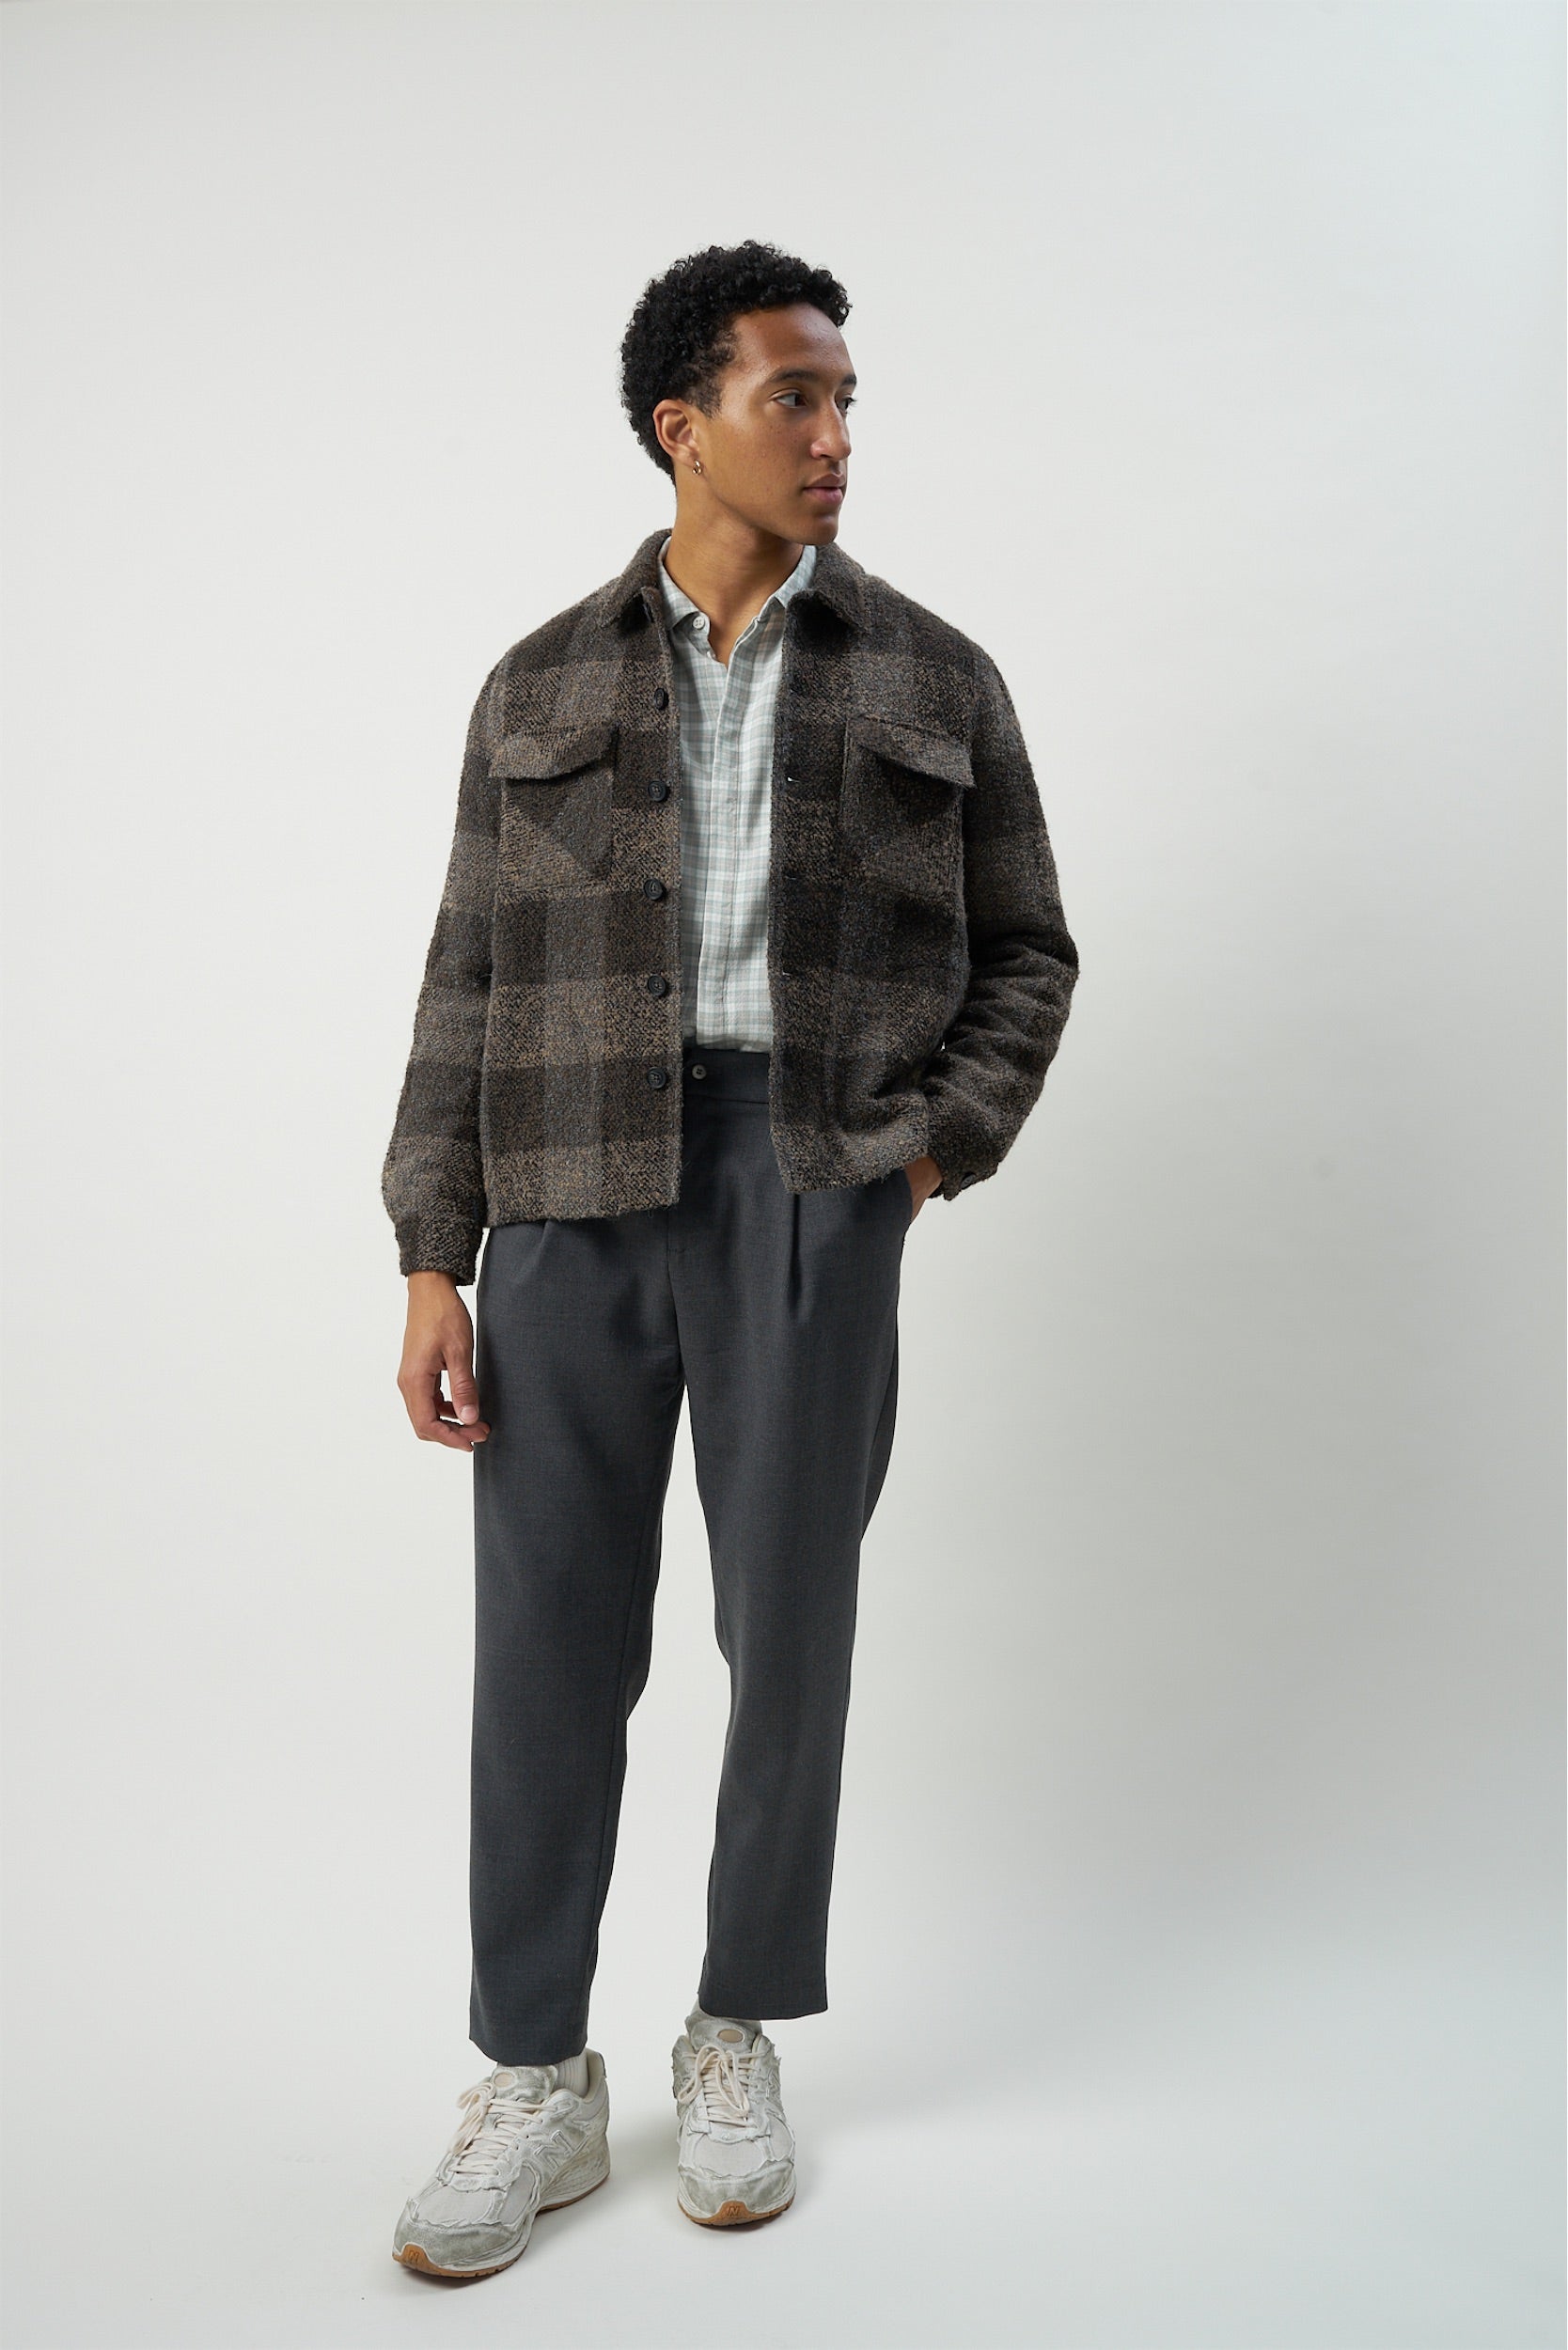 Winter Jacket in the Finest Tonal Brown Grey Checked Italian Soft Virgin and Alpaca Wool